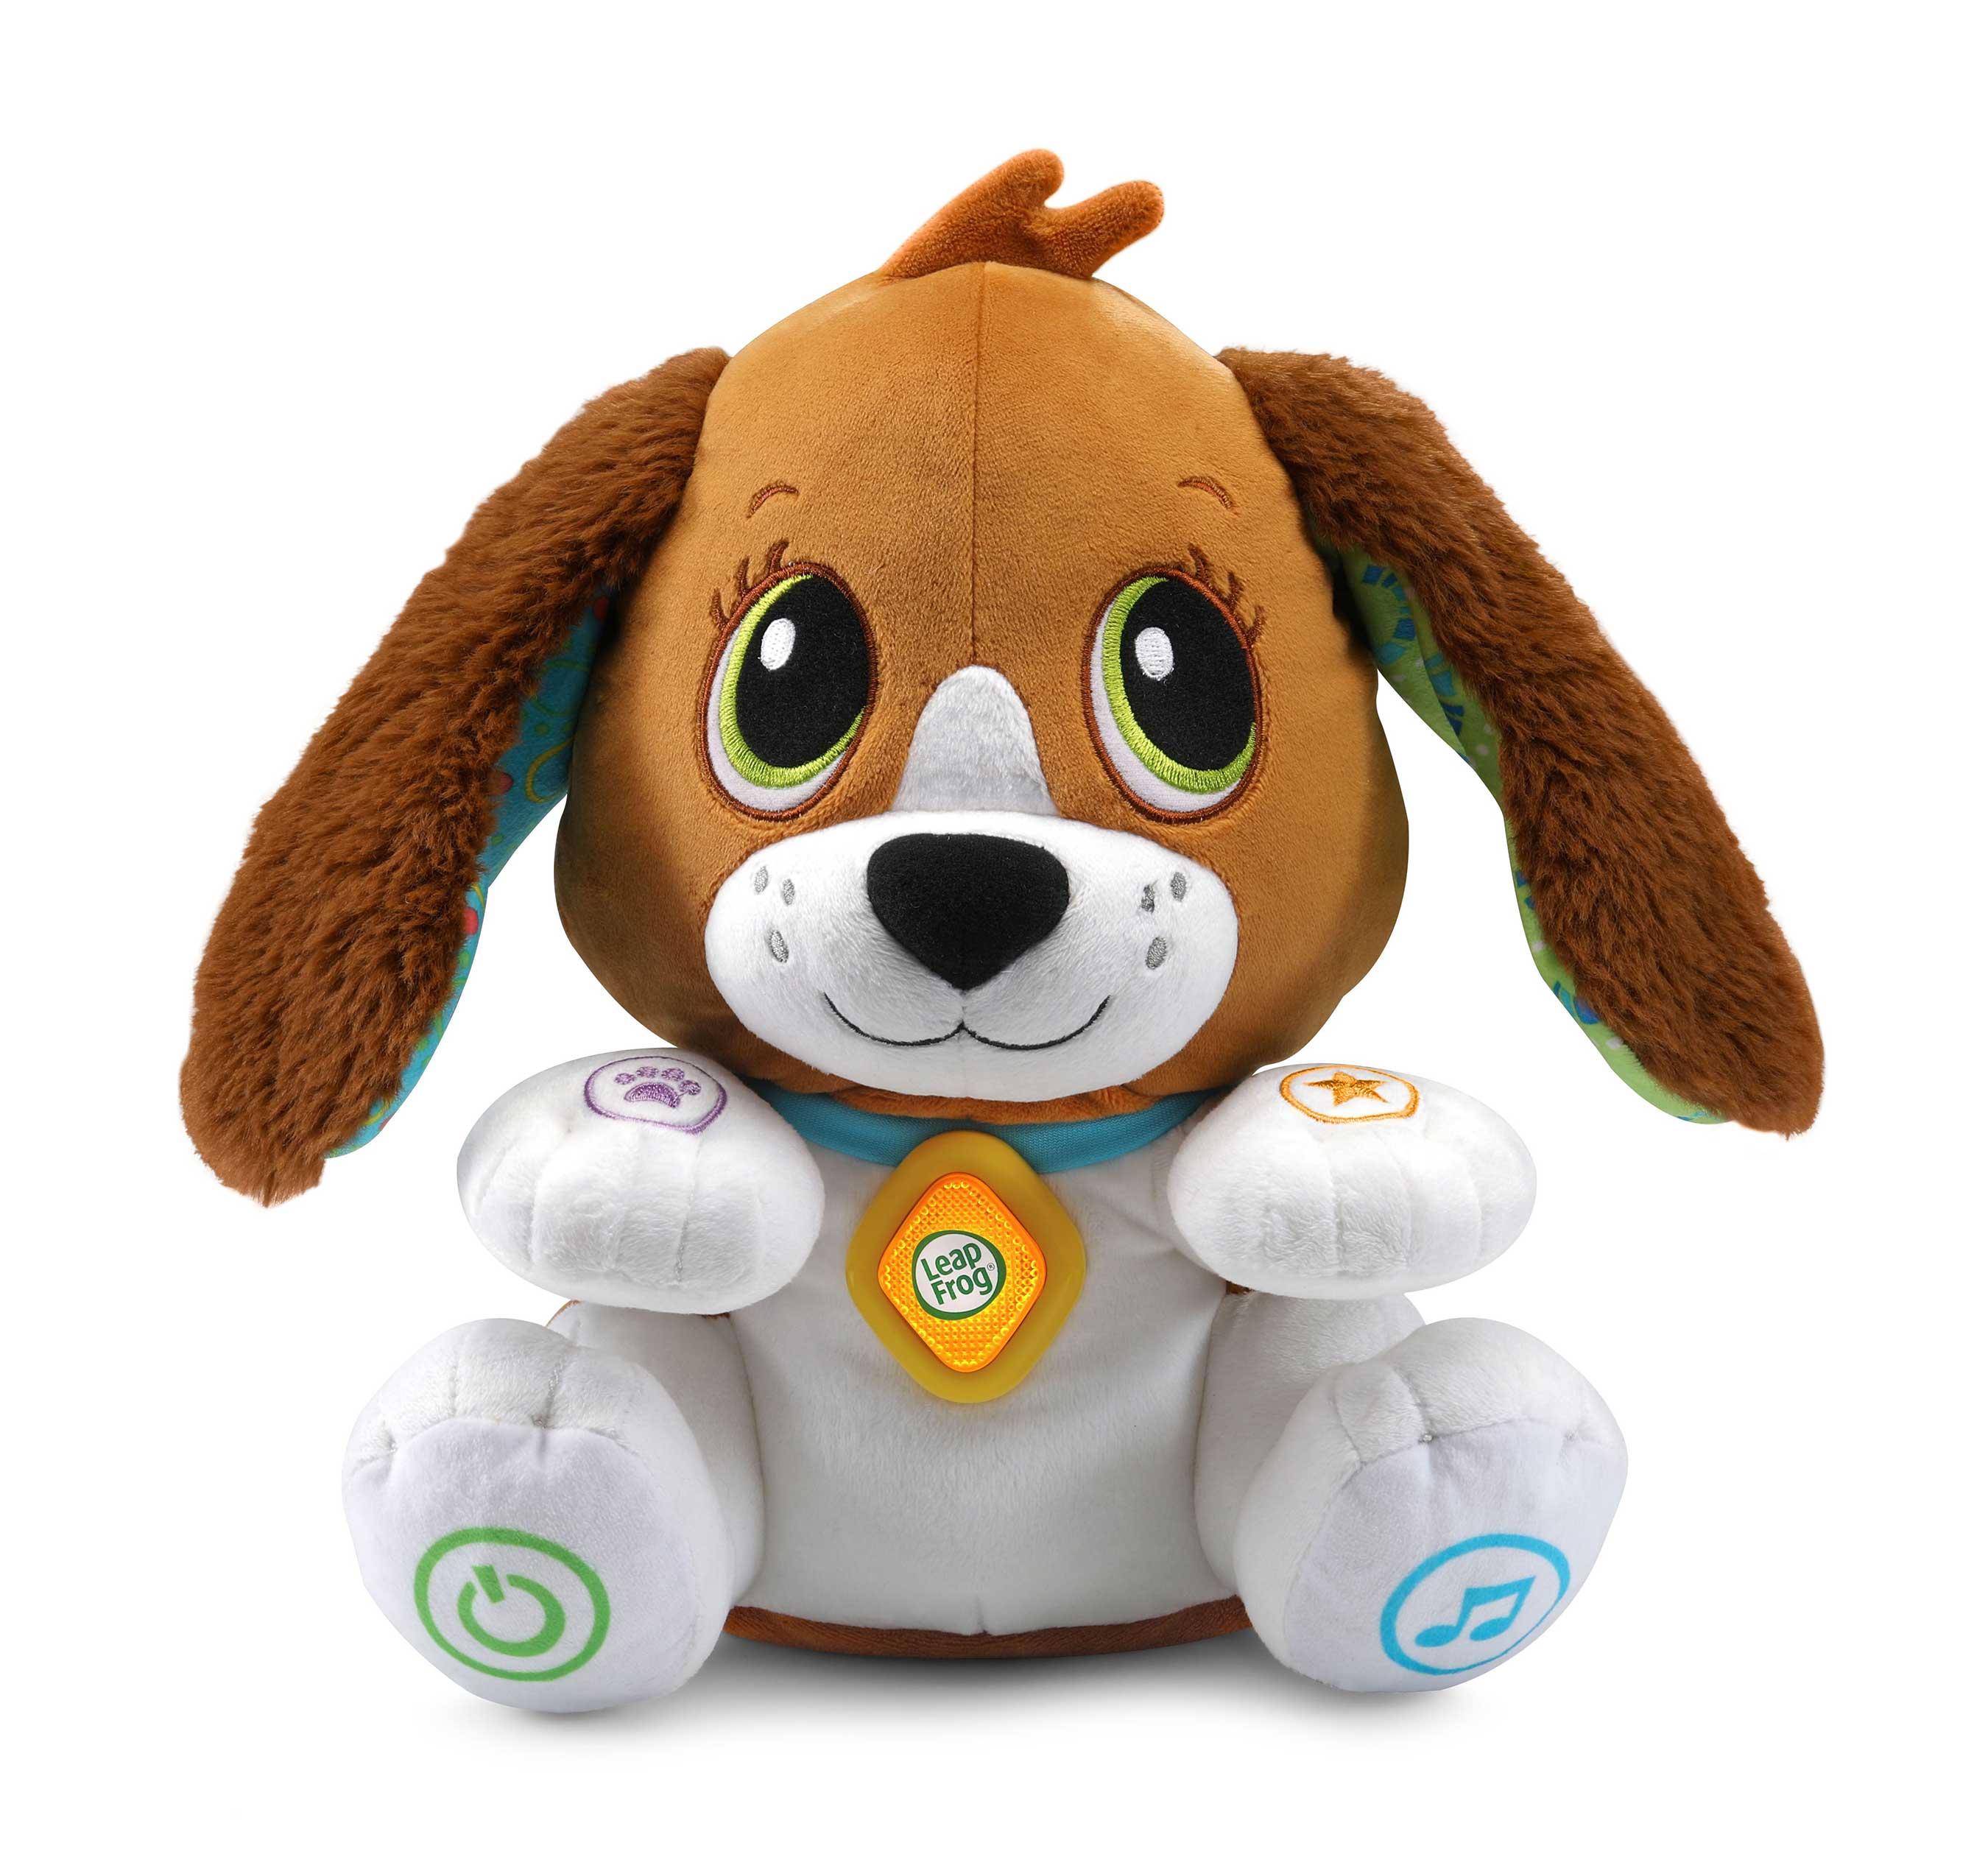 LeapFrog® Introduces New Infant and Preschool Learning Toys